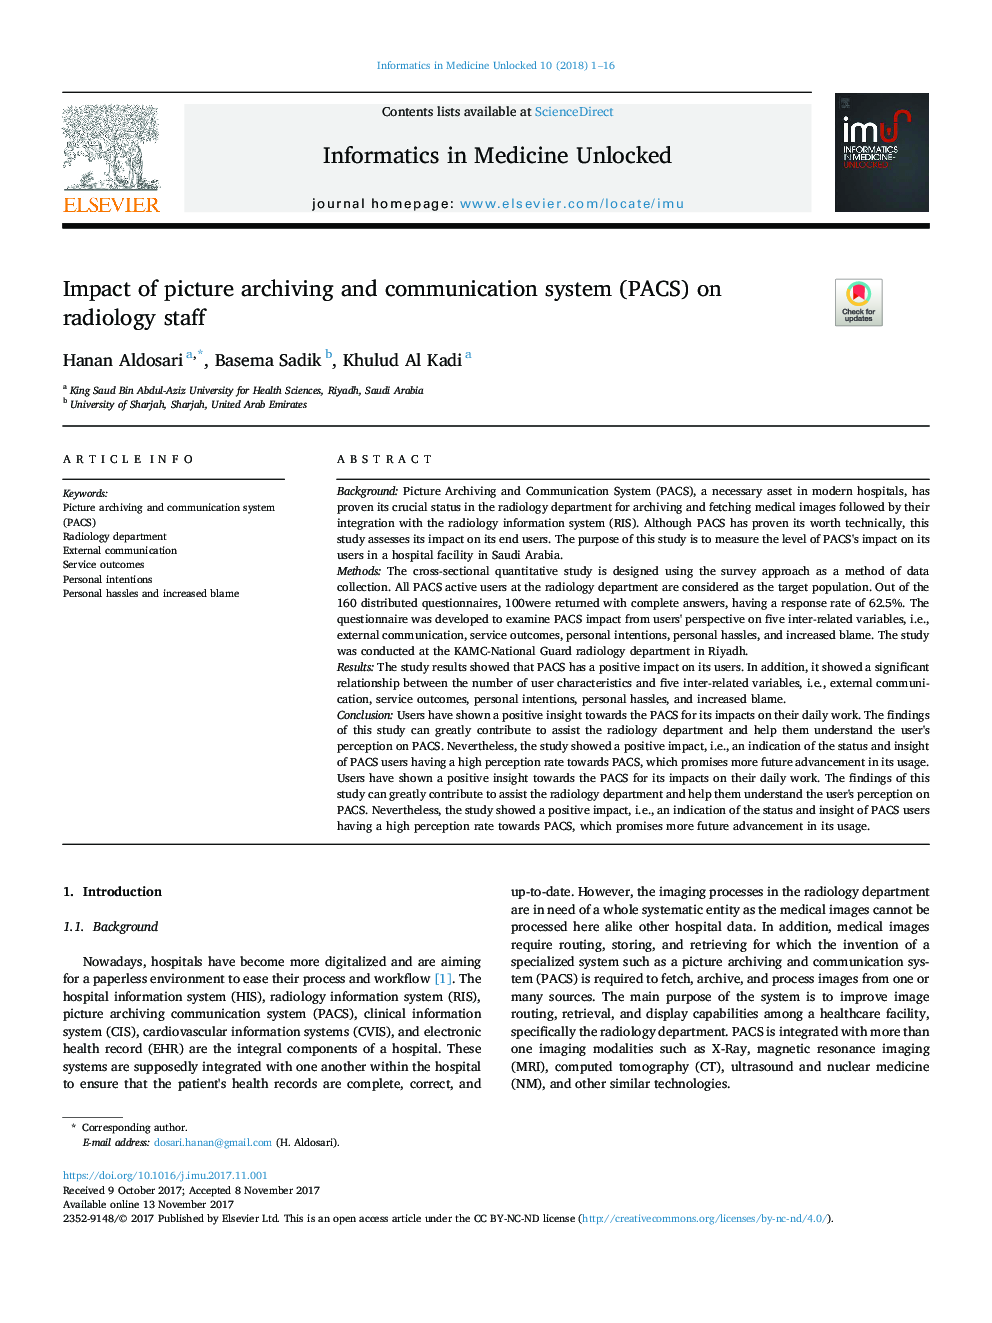 Impact of picture archiving and communication system (PACS) on radiology staff